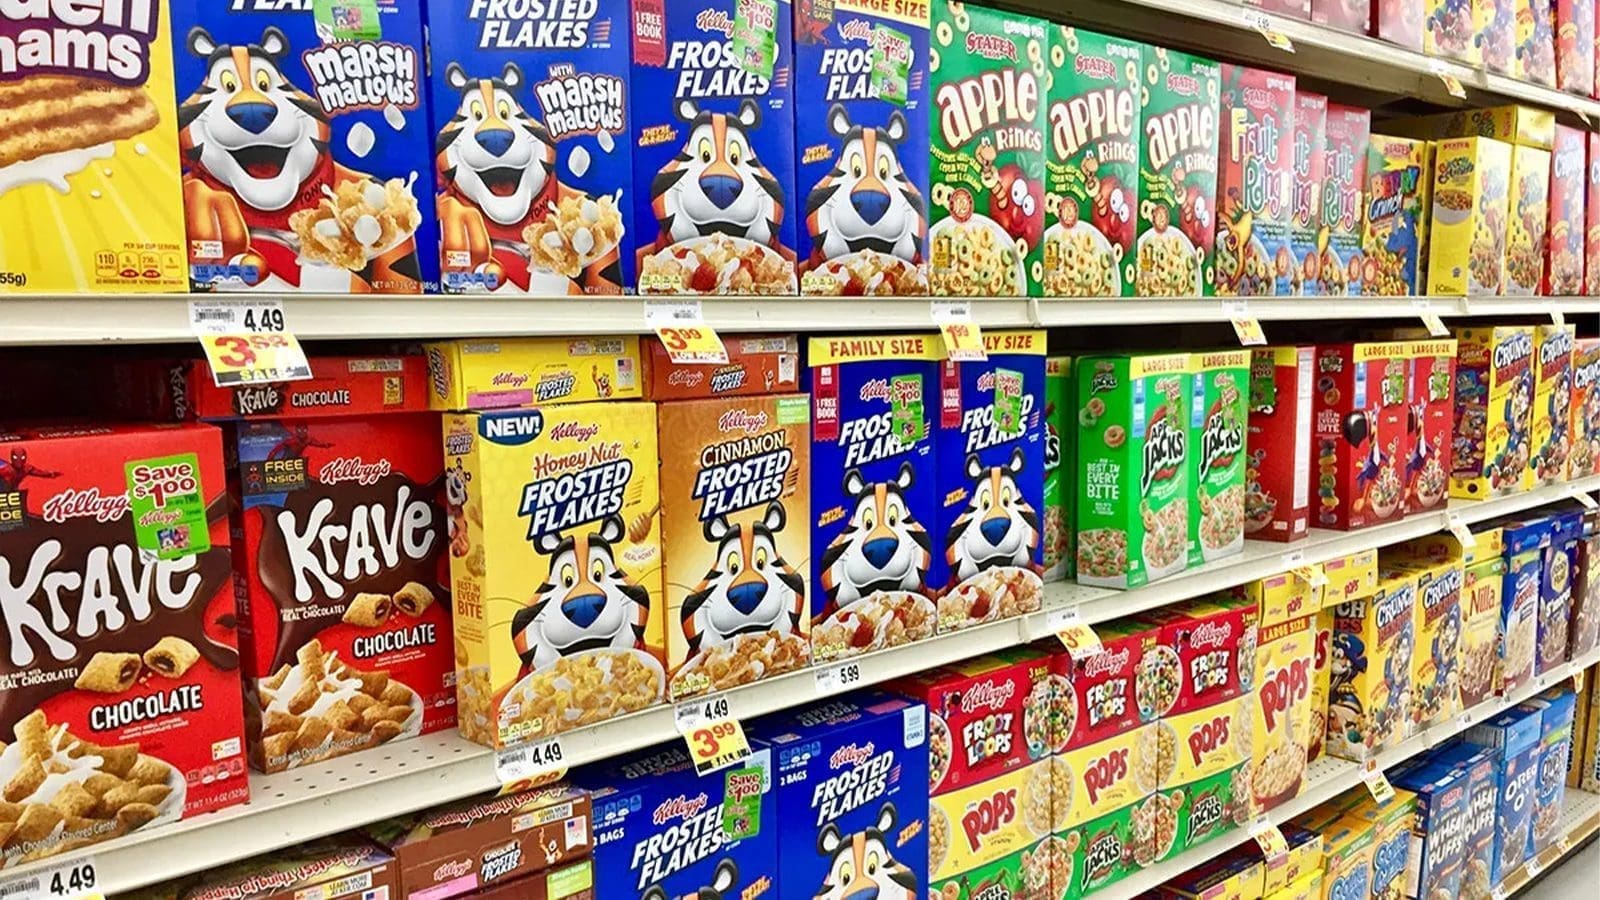 Excessive sugar in kid-appealing cereals, yogurts sparks call for packaging overhaul